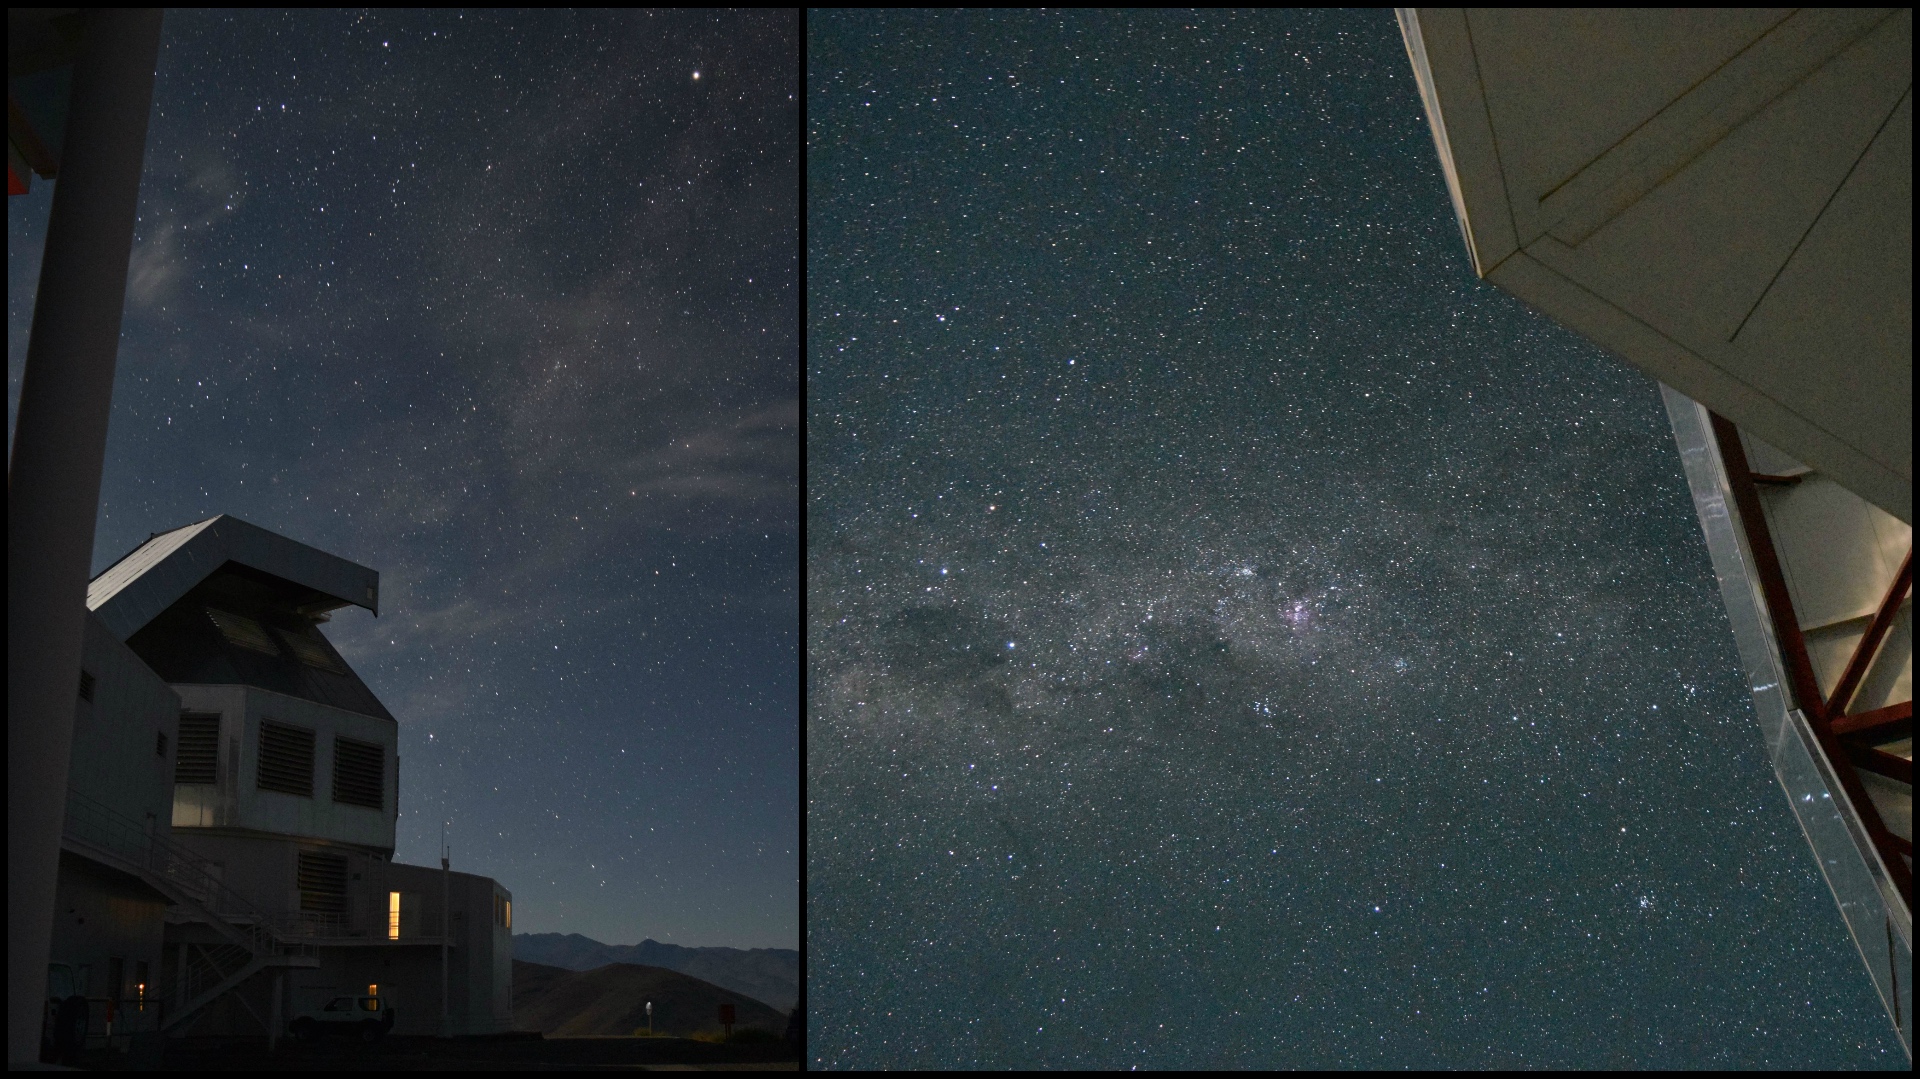 Magellan against the backdrop of the Milky Way. The word 'surreal' comes to mind.